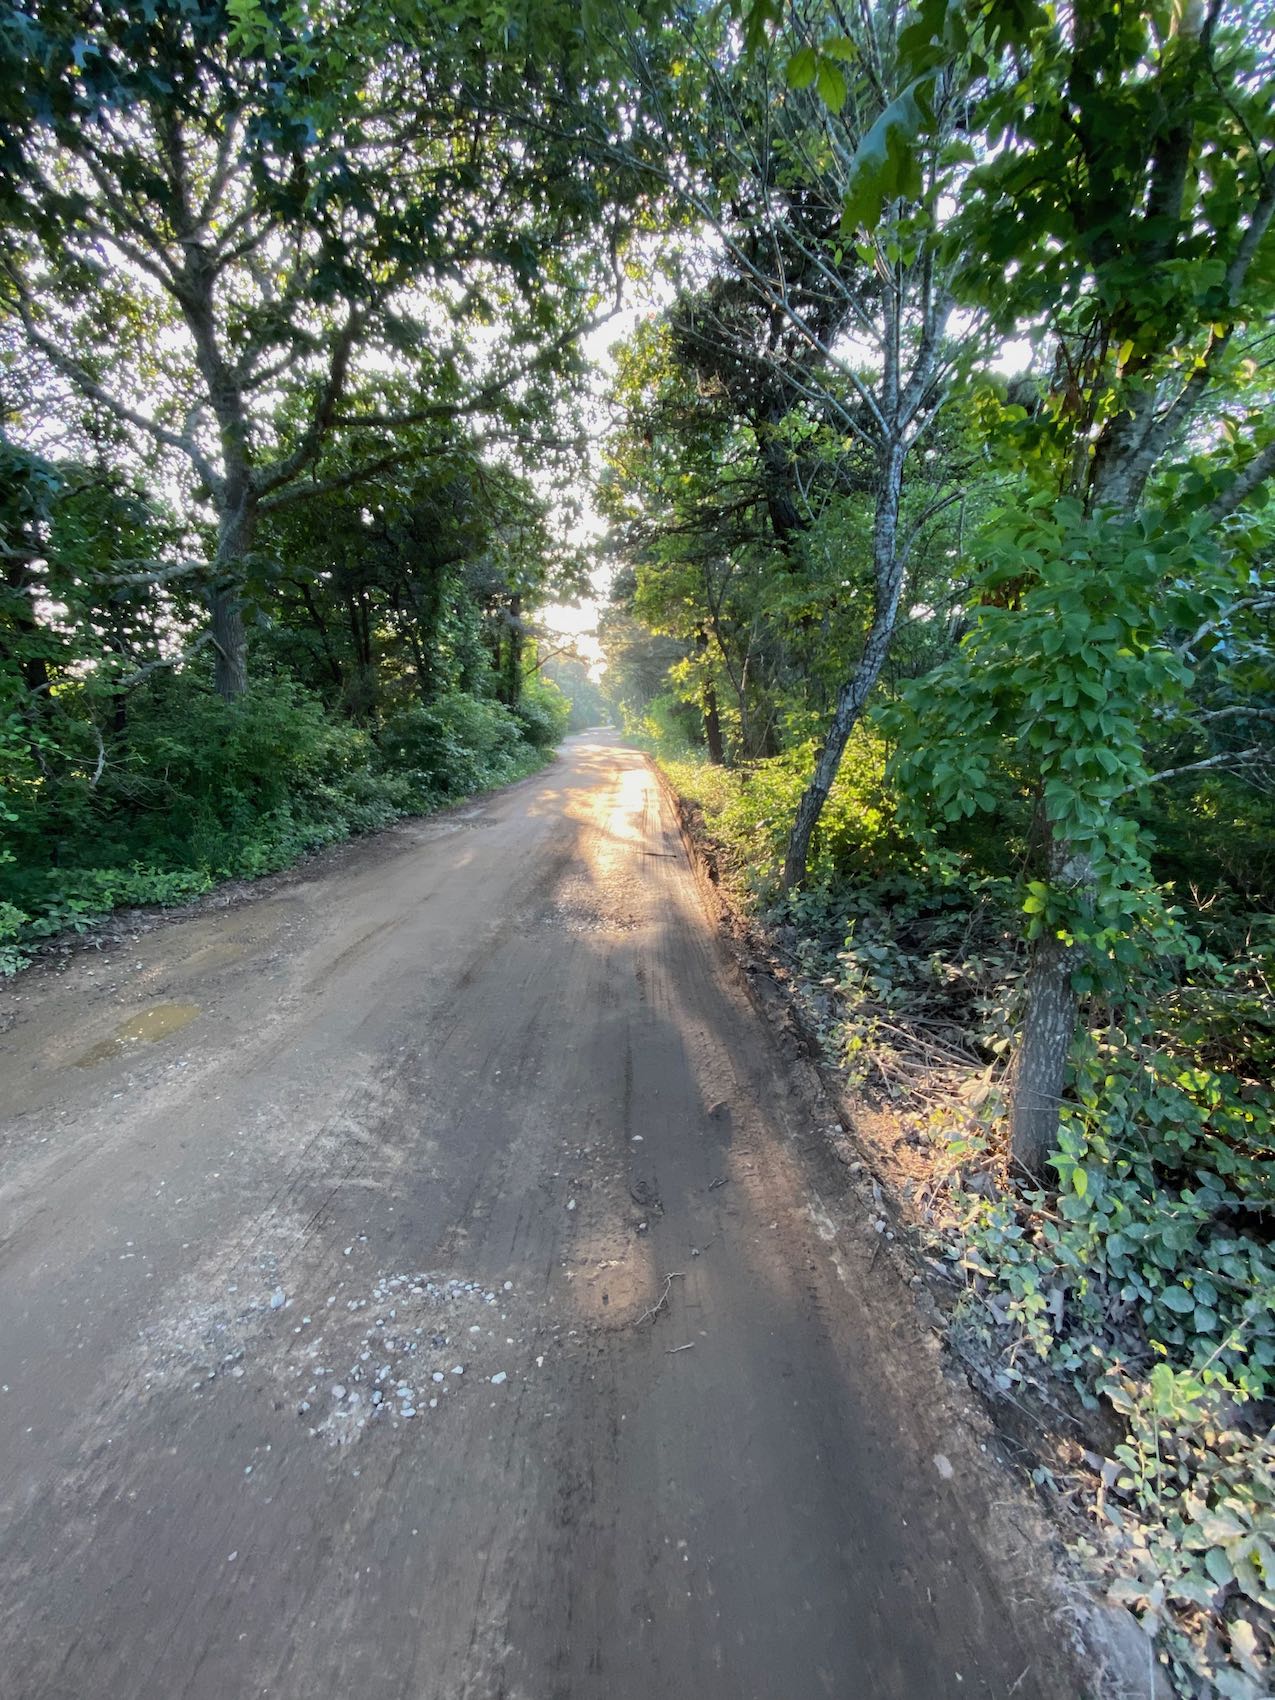 It's the weekend! Number 303, Sunlight Shines on a Dirt Road After a Rain